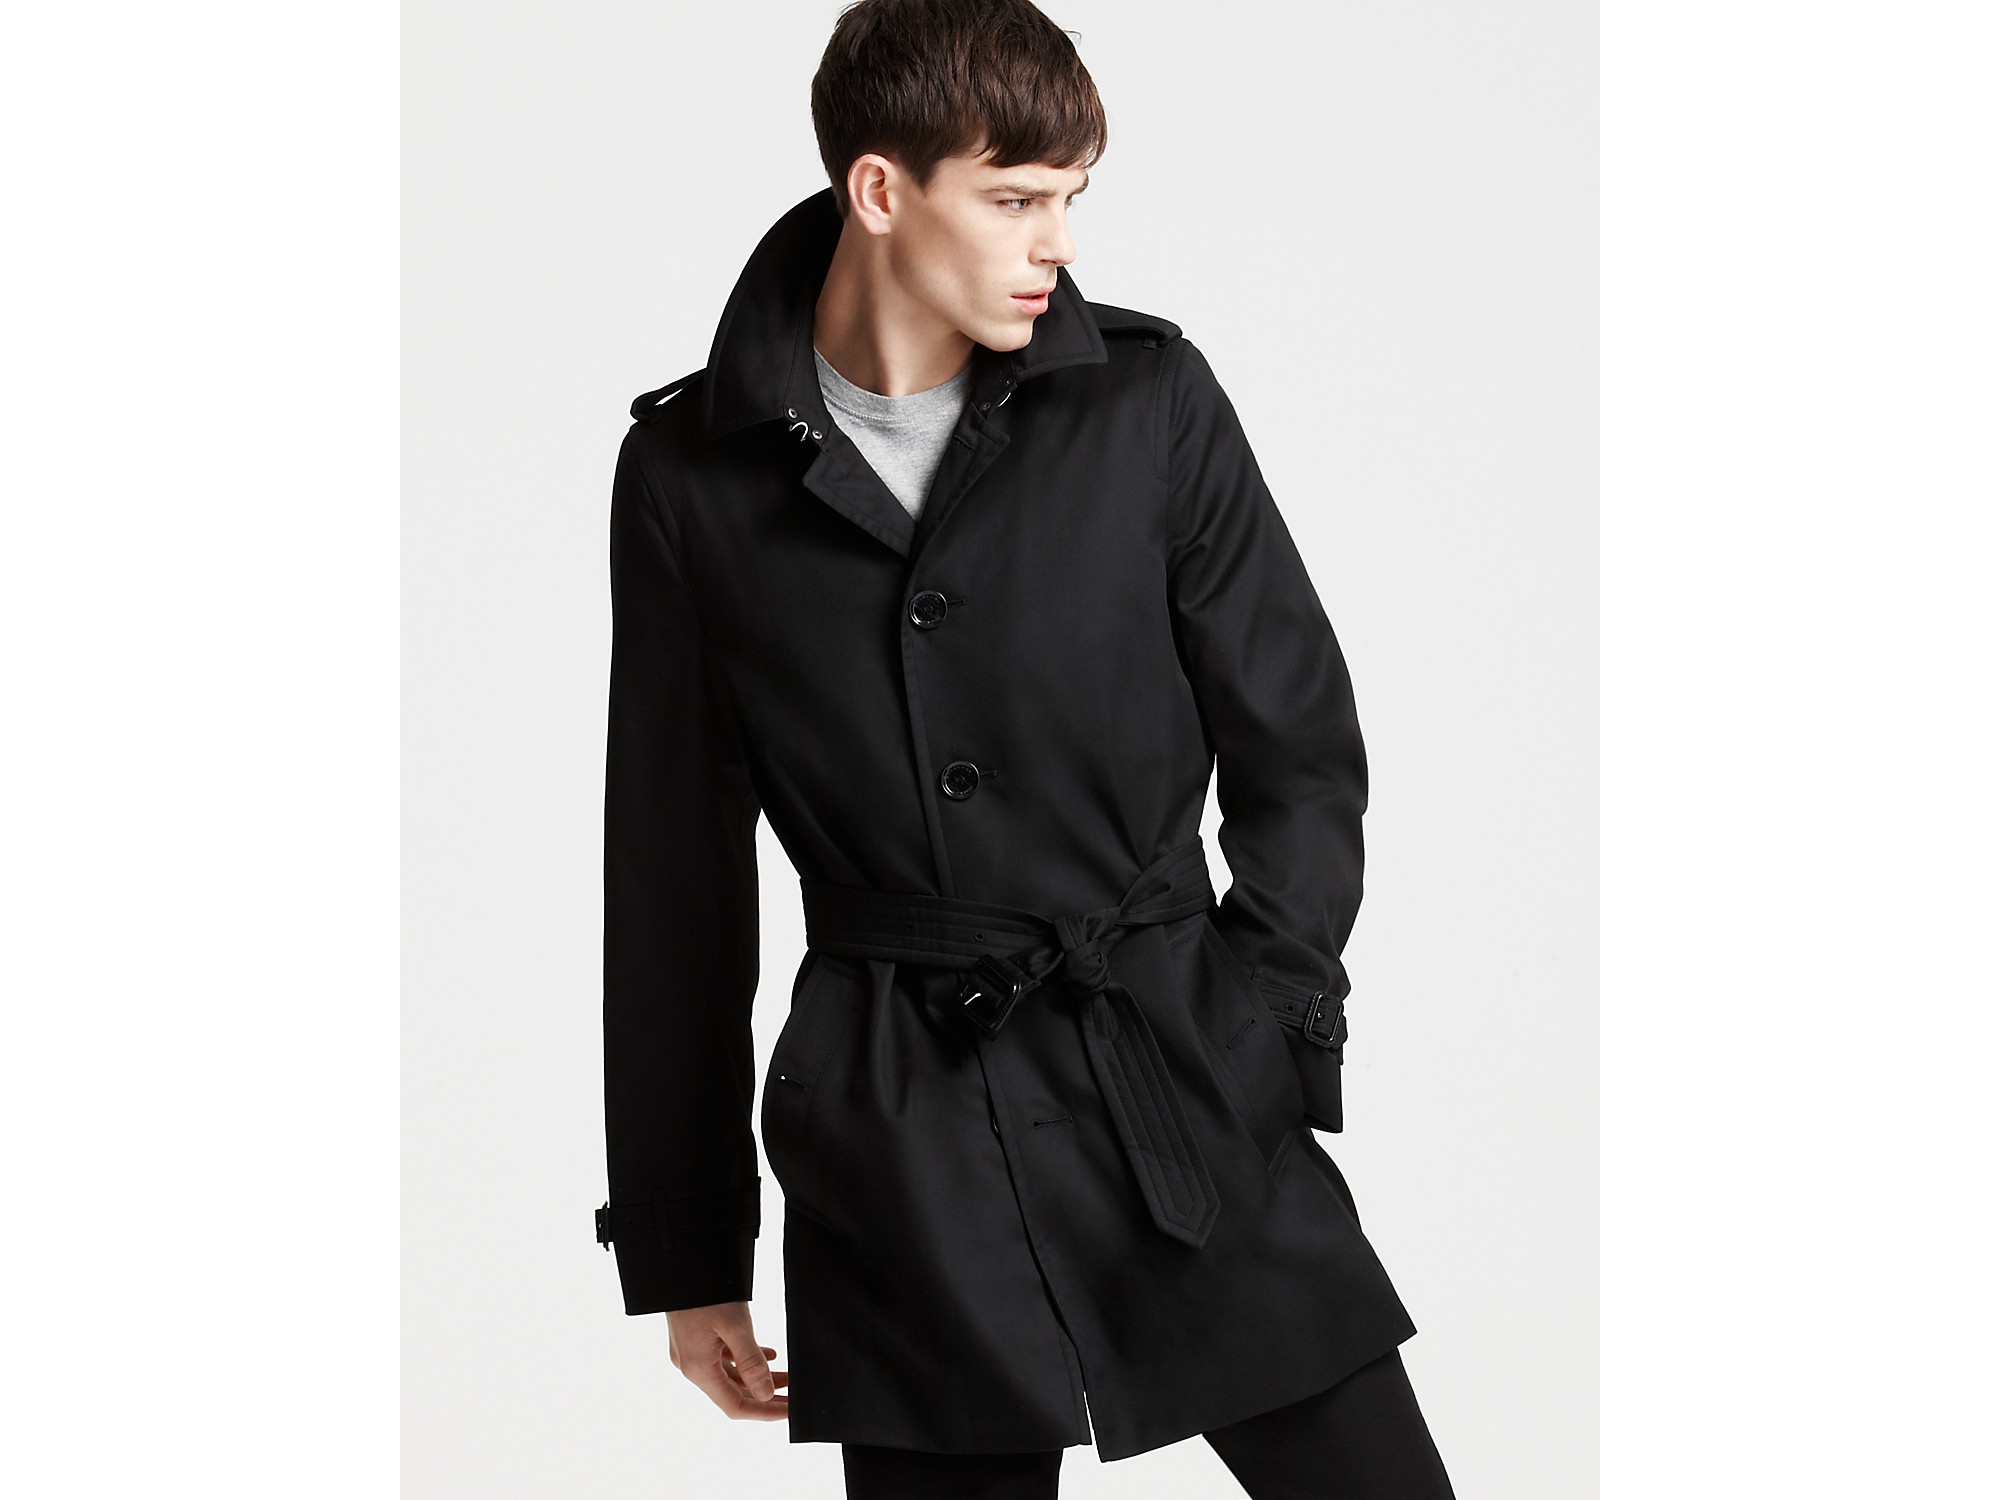 Burberry London Single Breasted Trench Coat in Black for Men - Lyst